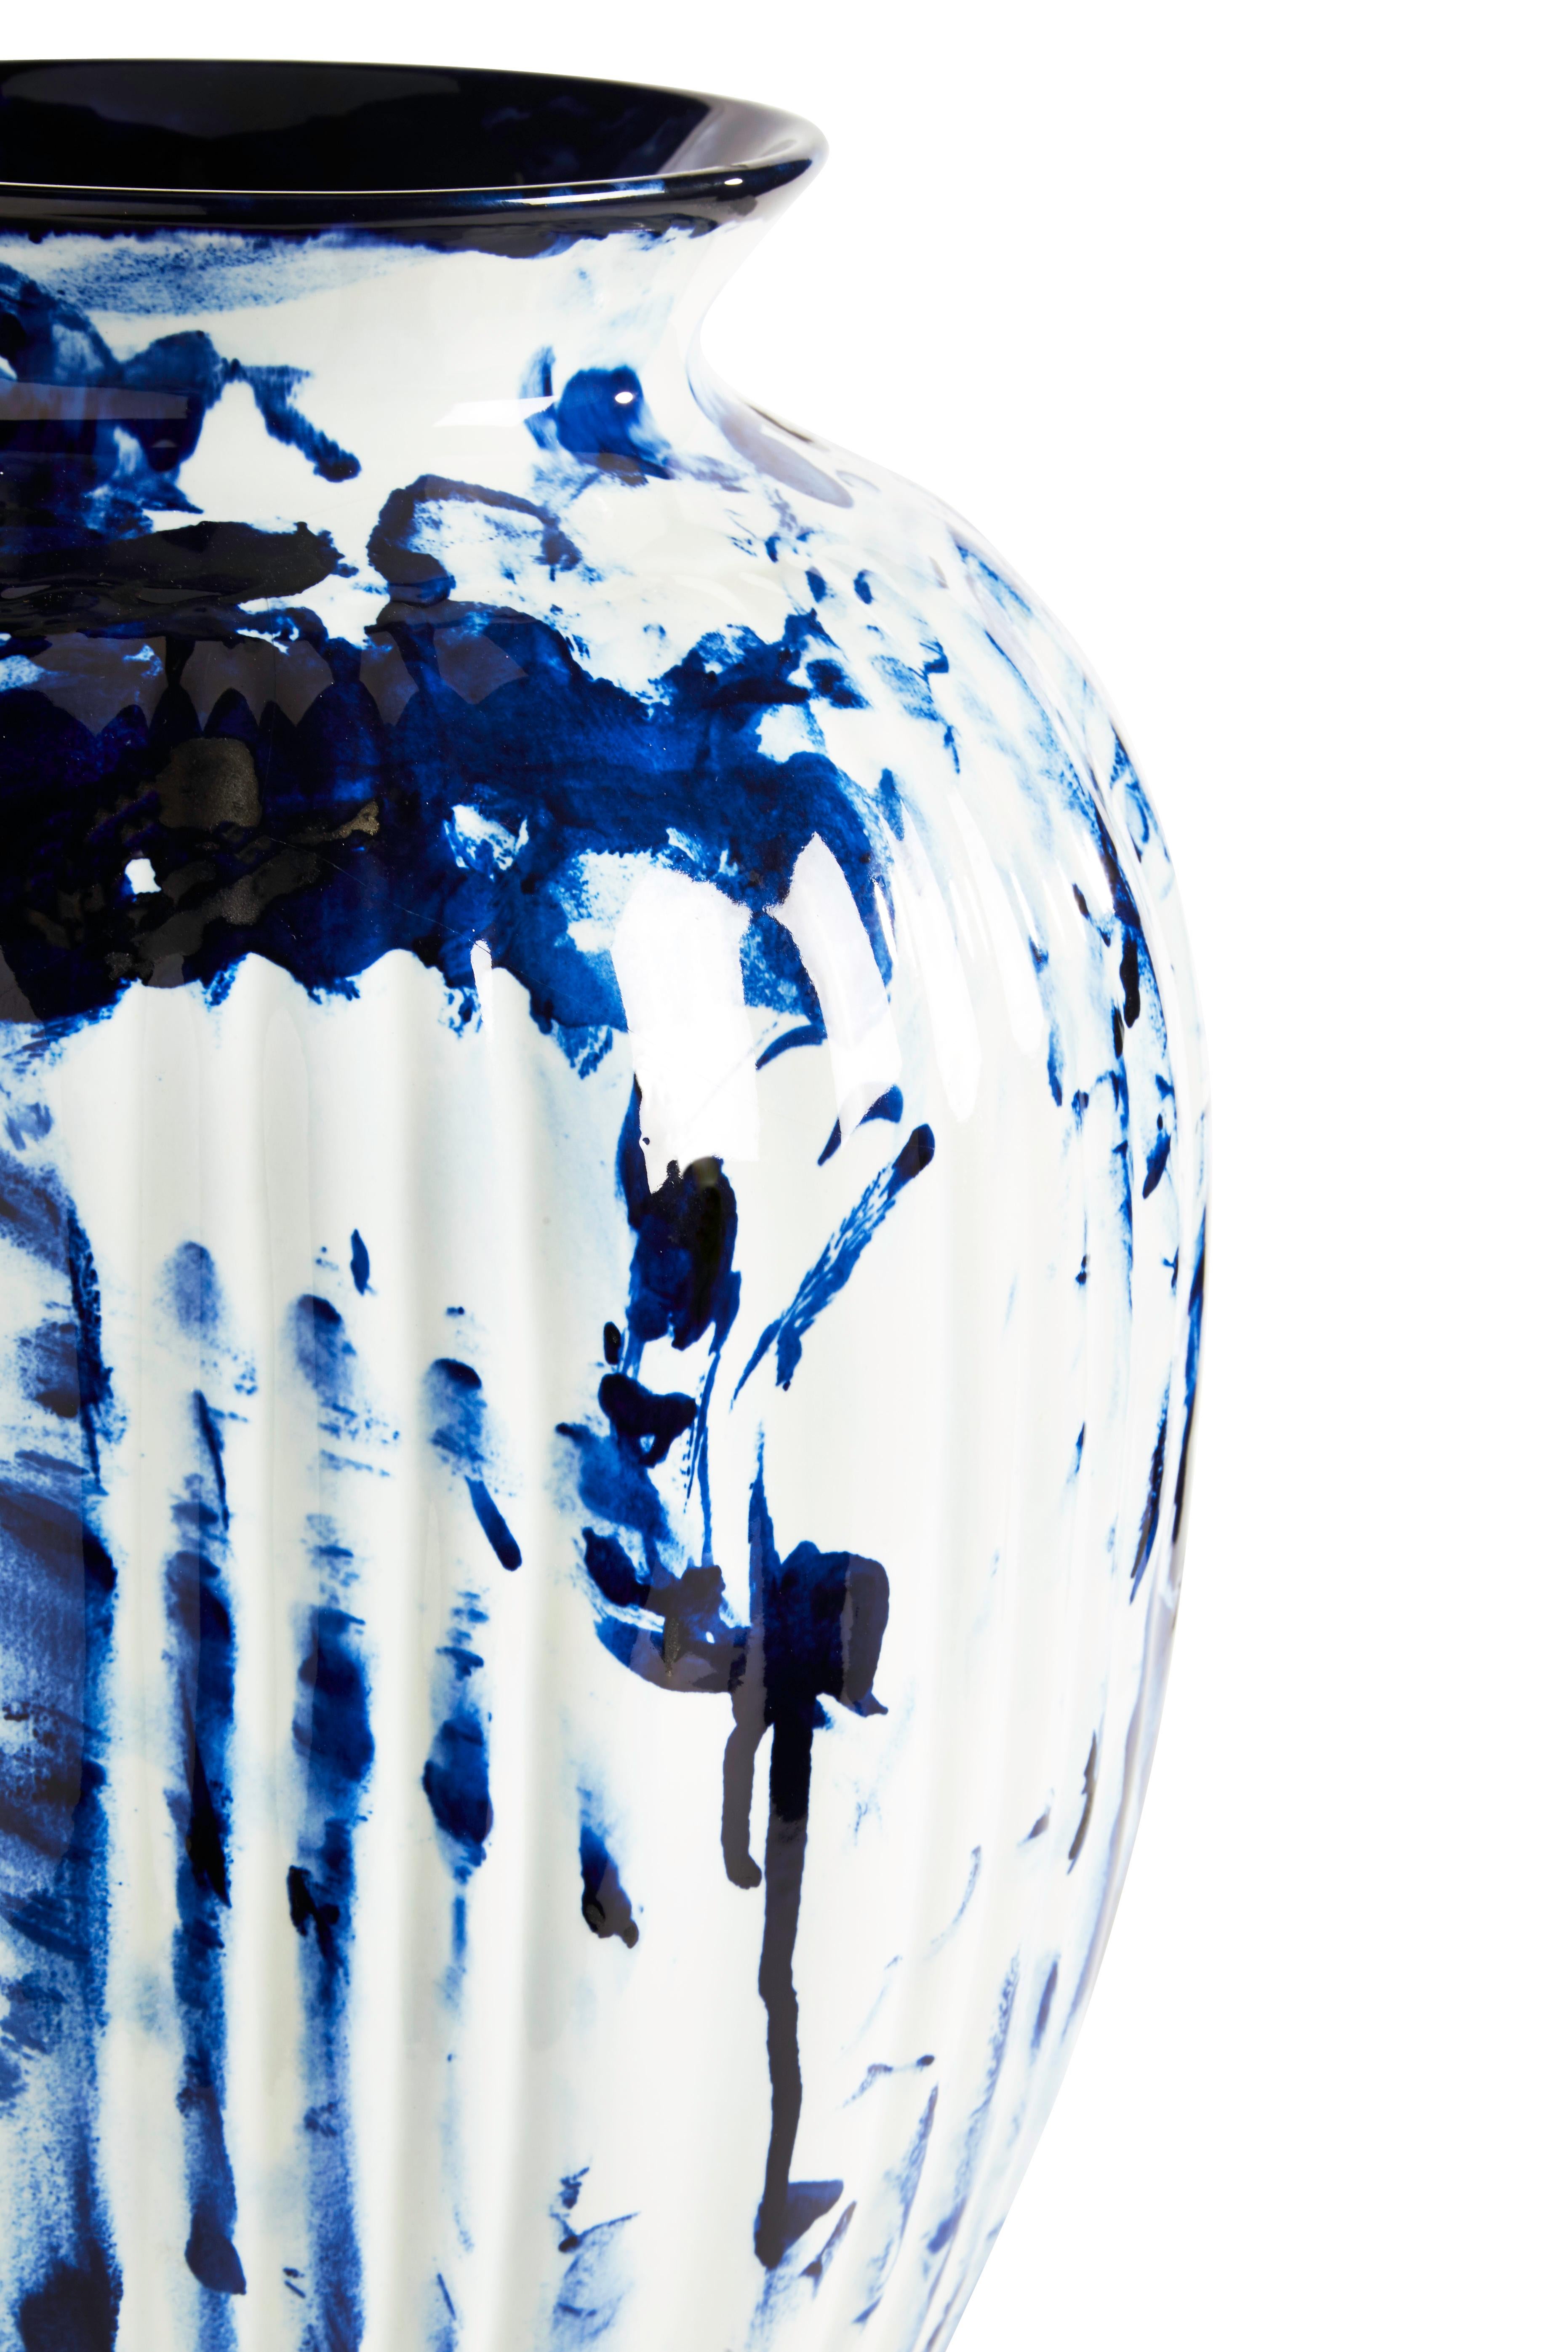 Glazed Vase Big, by Marcel Wanders, Delft Blue Hand-Painted, 2006, Unique #100039/2